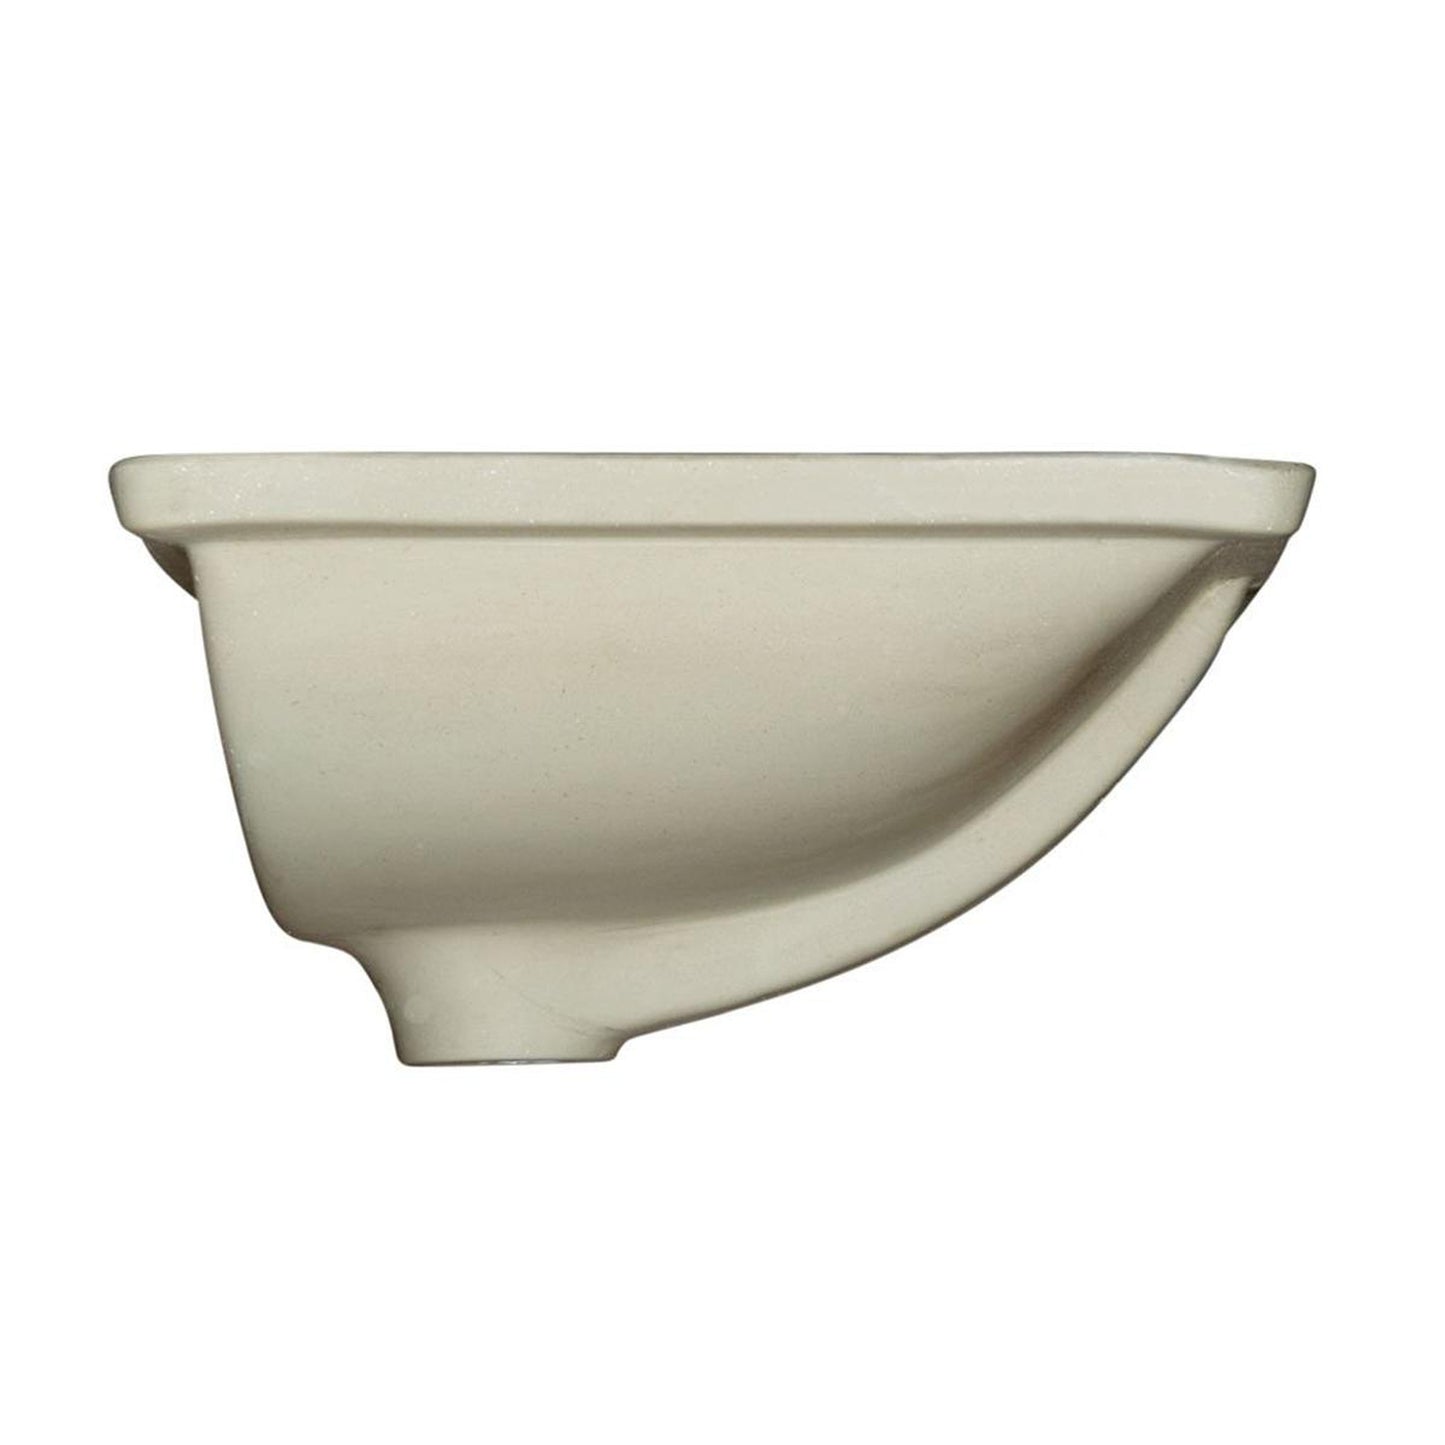 Pelican Int'l Pearl Series PL-3099 18" x 13" Individually Packaged White Porcelain Undermount Bathroom Sink